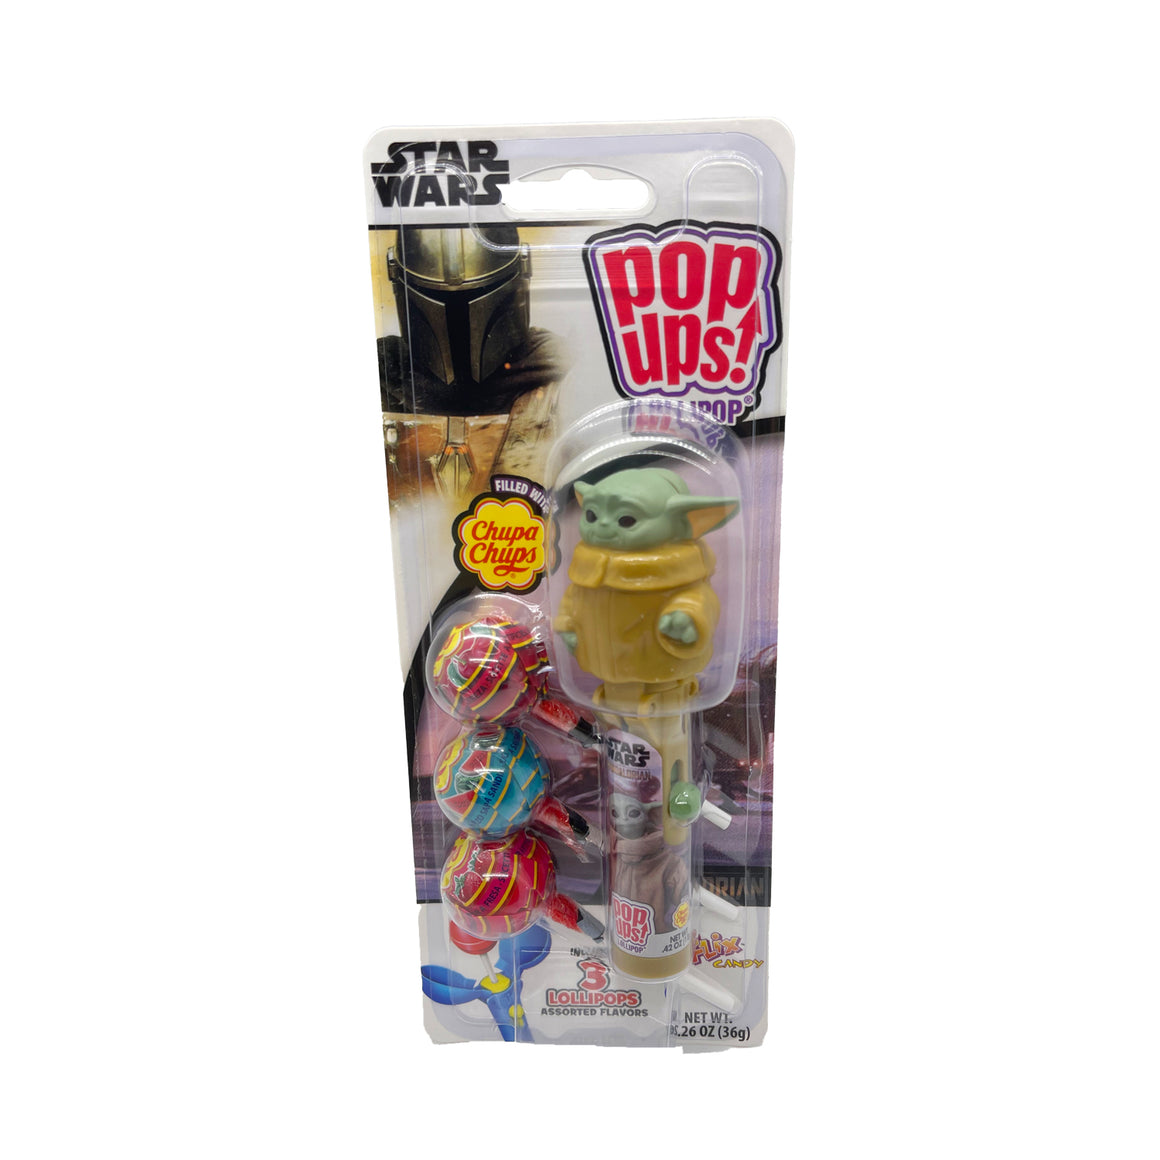 All City Candy Flix Pop ups! Star Wars Blister Card 1.26 oz. Grogu Novelty Flix Candy For fresh candy and great service, visit www.allcitycandy.com